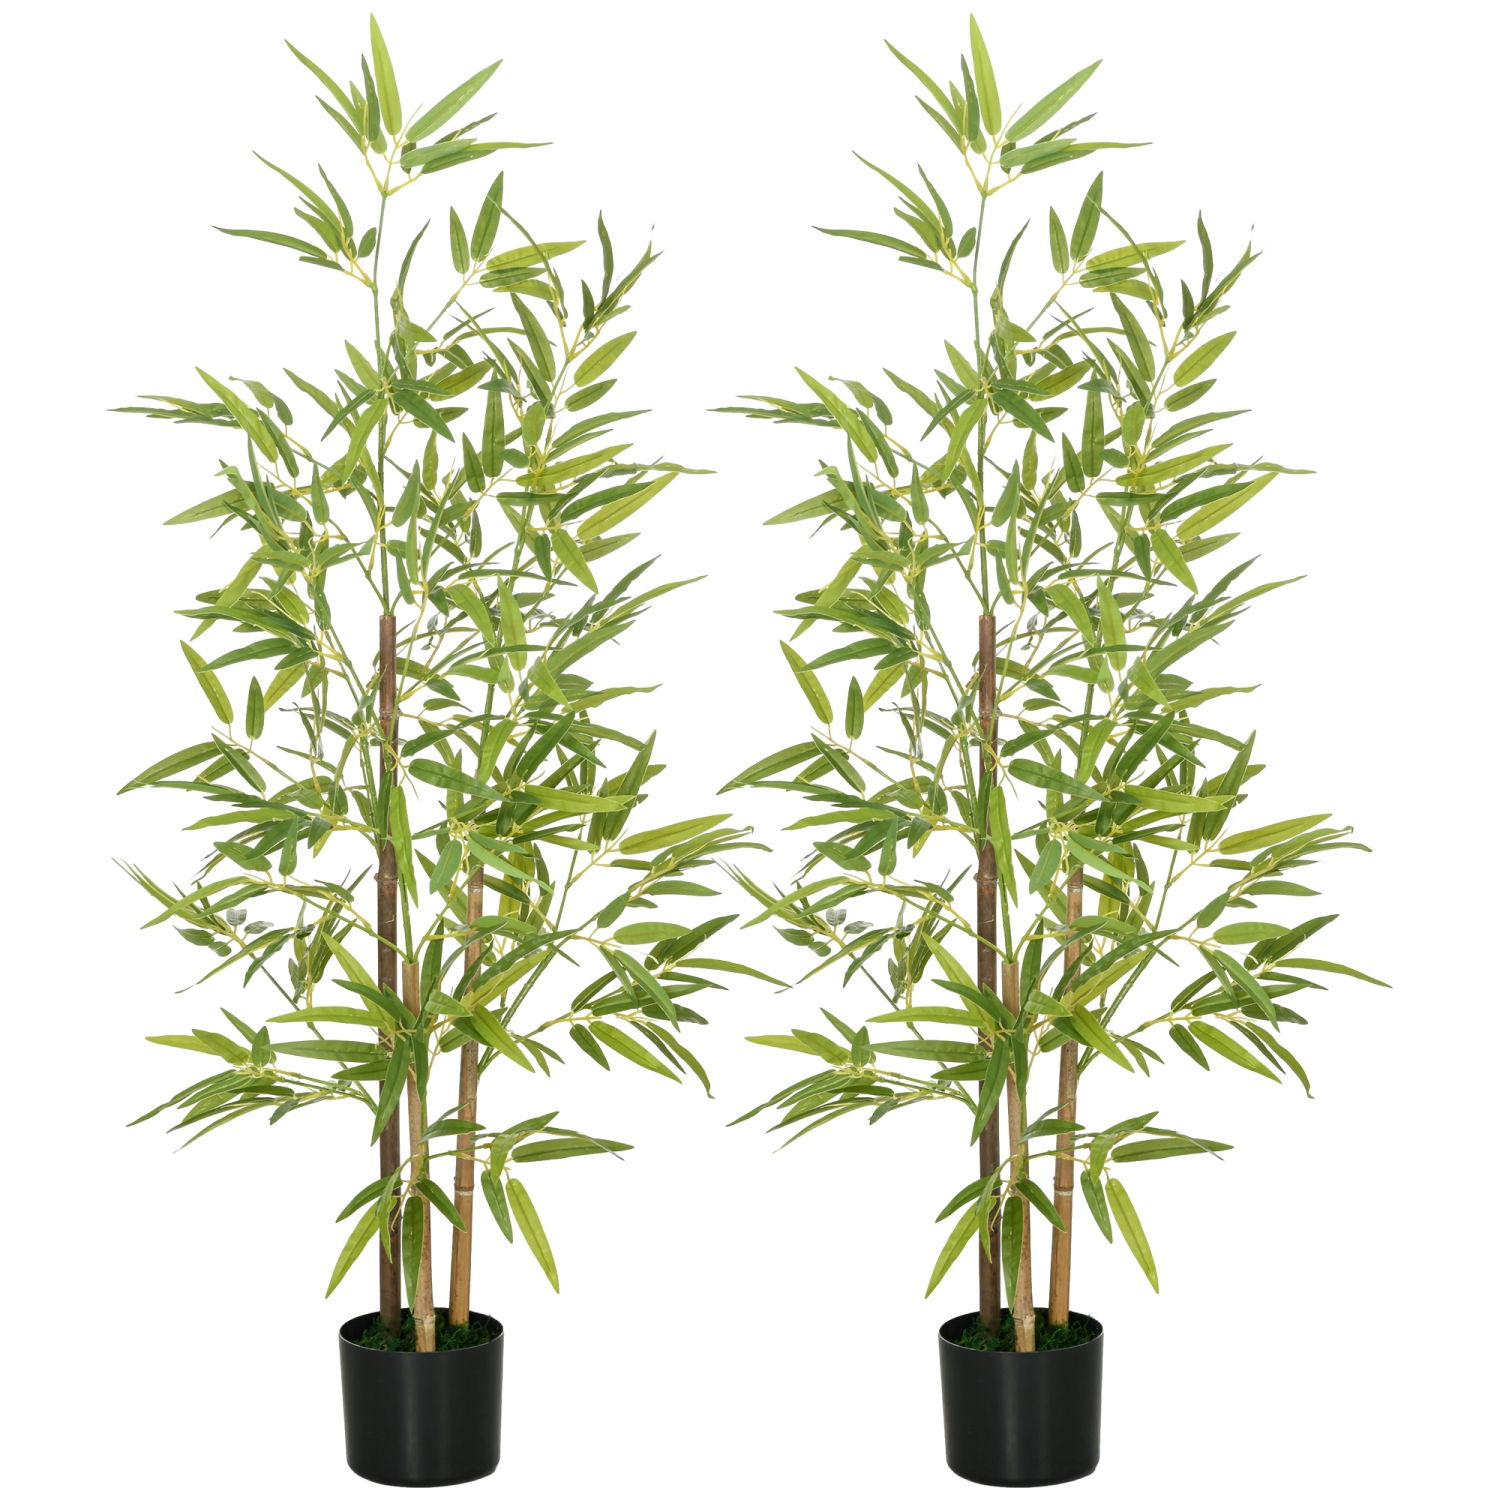 HOMCOM 4ft Set of 2 Artificial Bamboo with Pot, Indoor Fake Plants for Home Office Living Room Decor